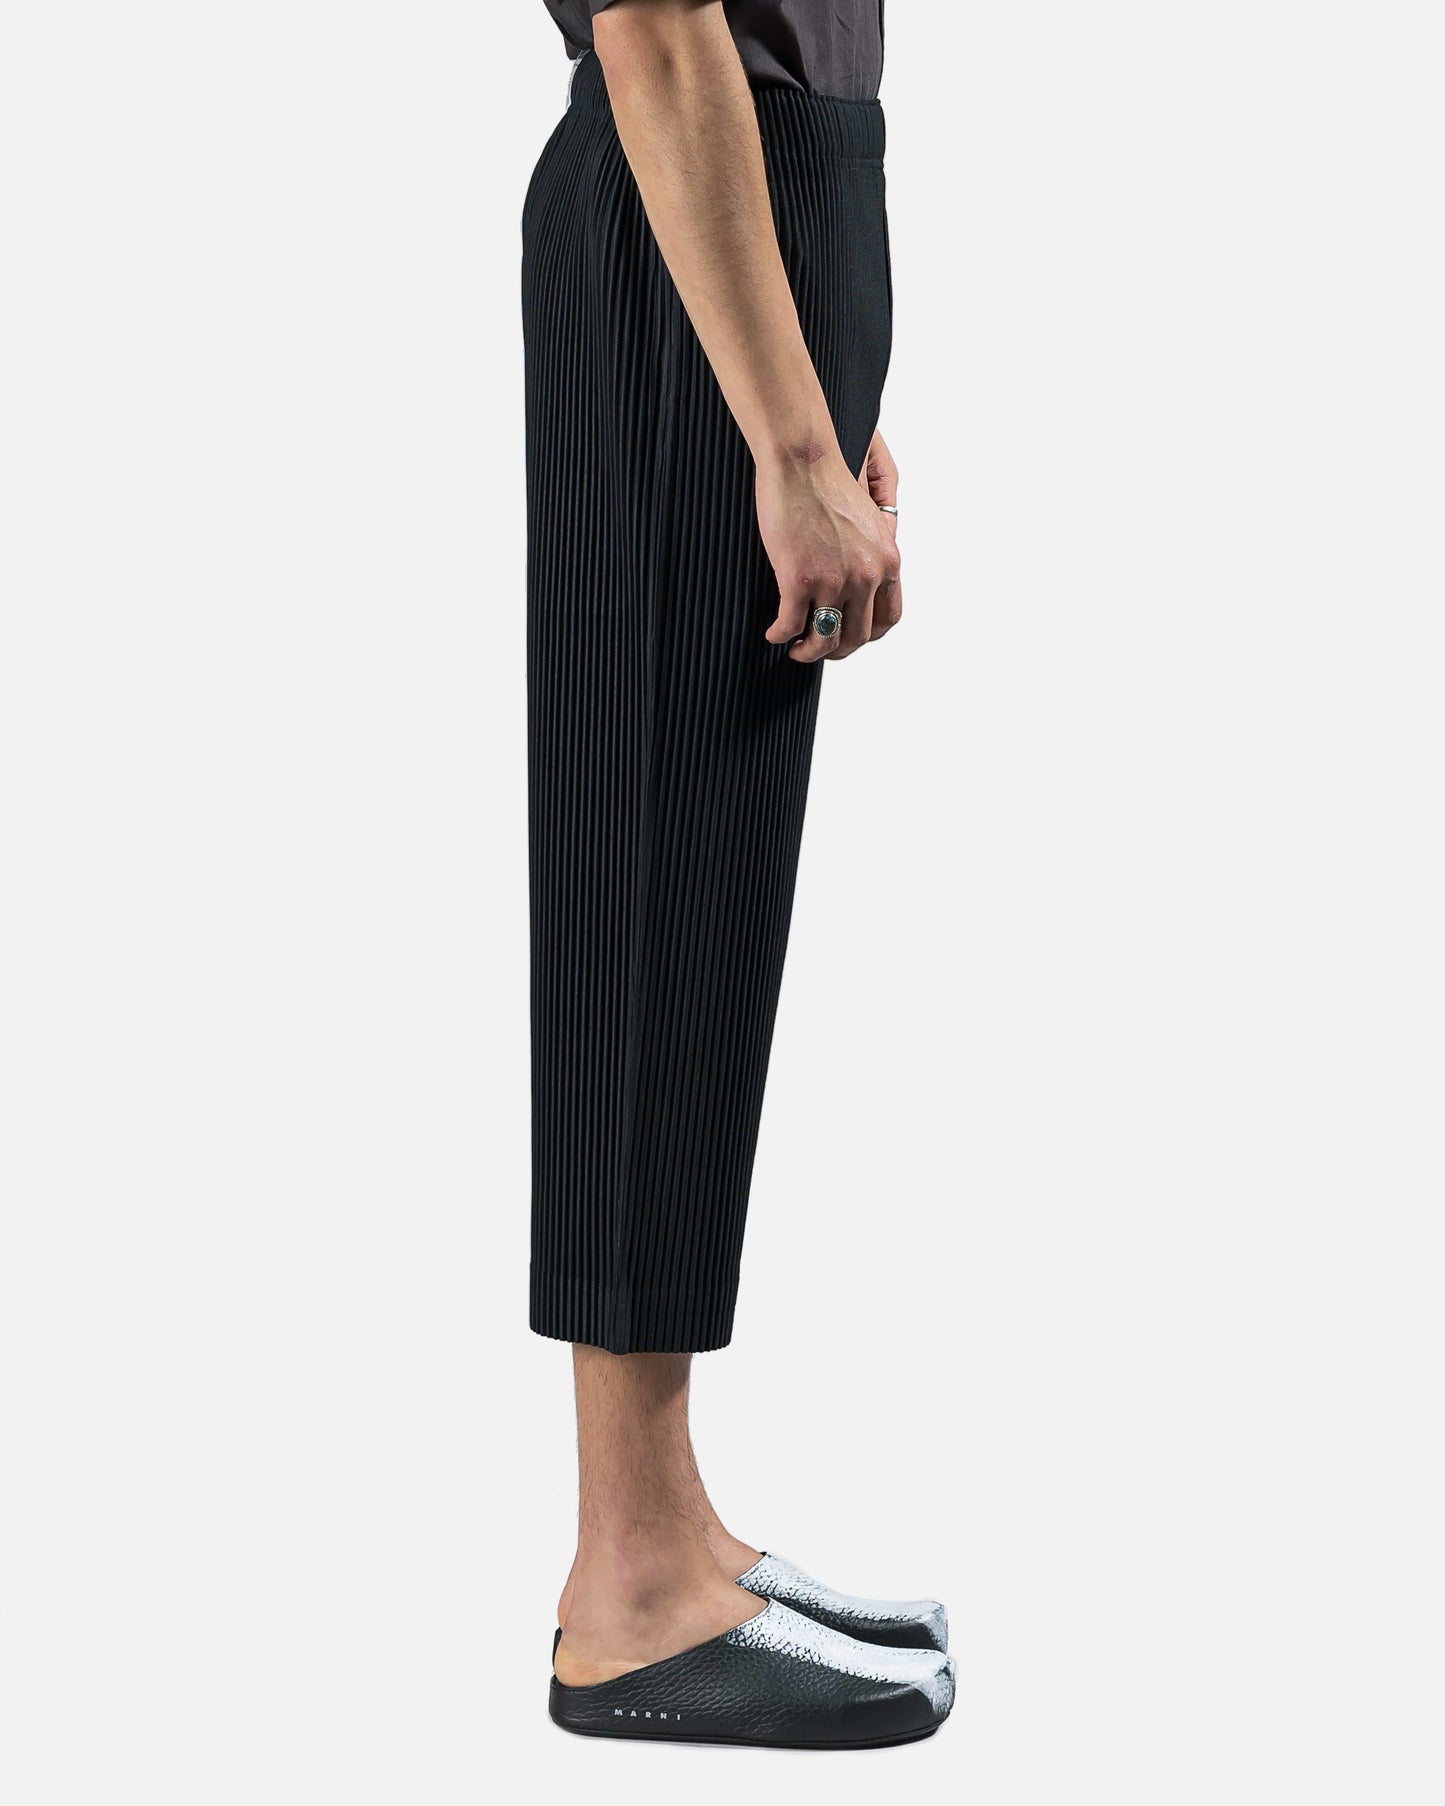 Homme Plissé Issey Miyake Men's Pants Cropped Tailored Straight Pleated Trousers 2 in Black